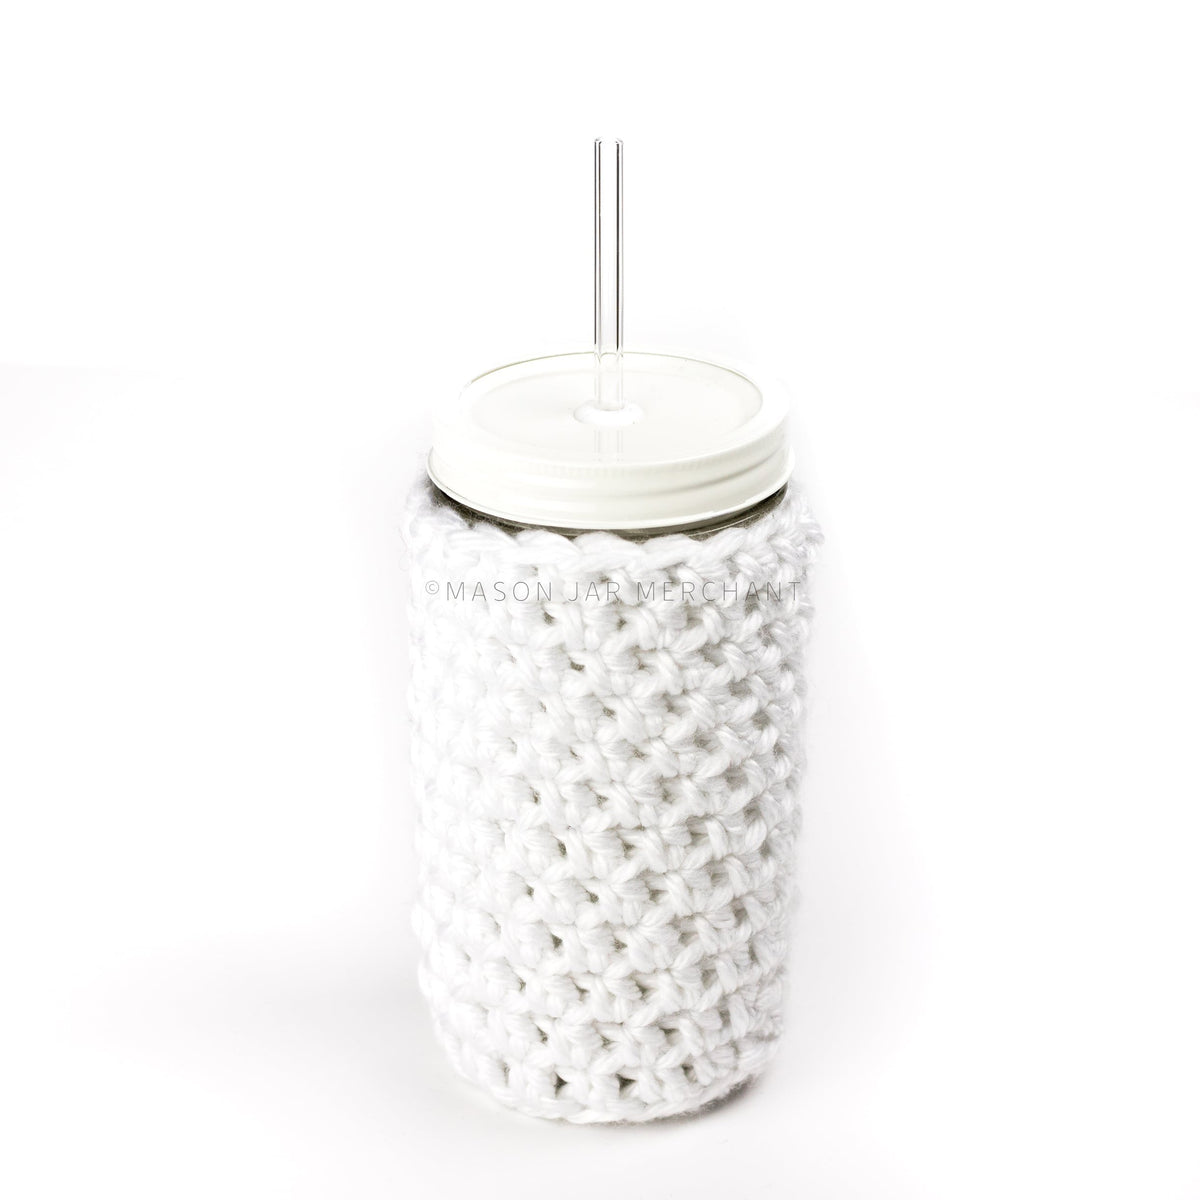 24 oz glass reusable mason jar tumbler with an all white straw lid and a glass reusable straw. A white knit cozy covers the jar